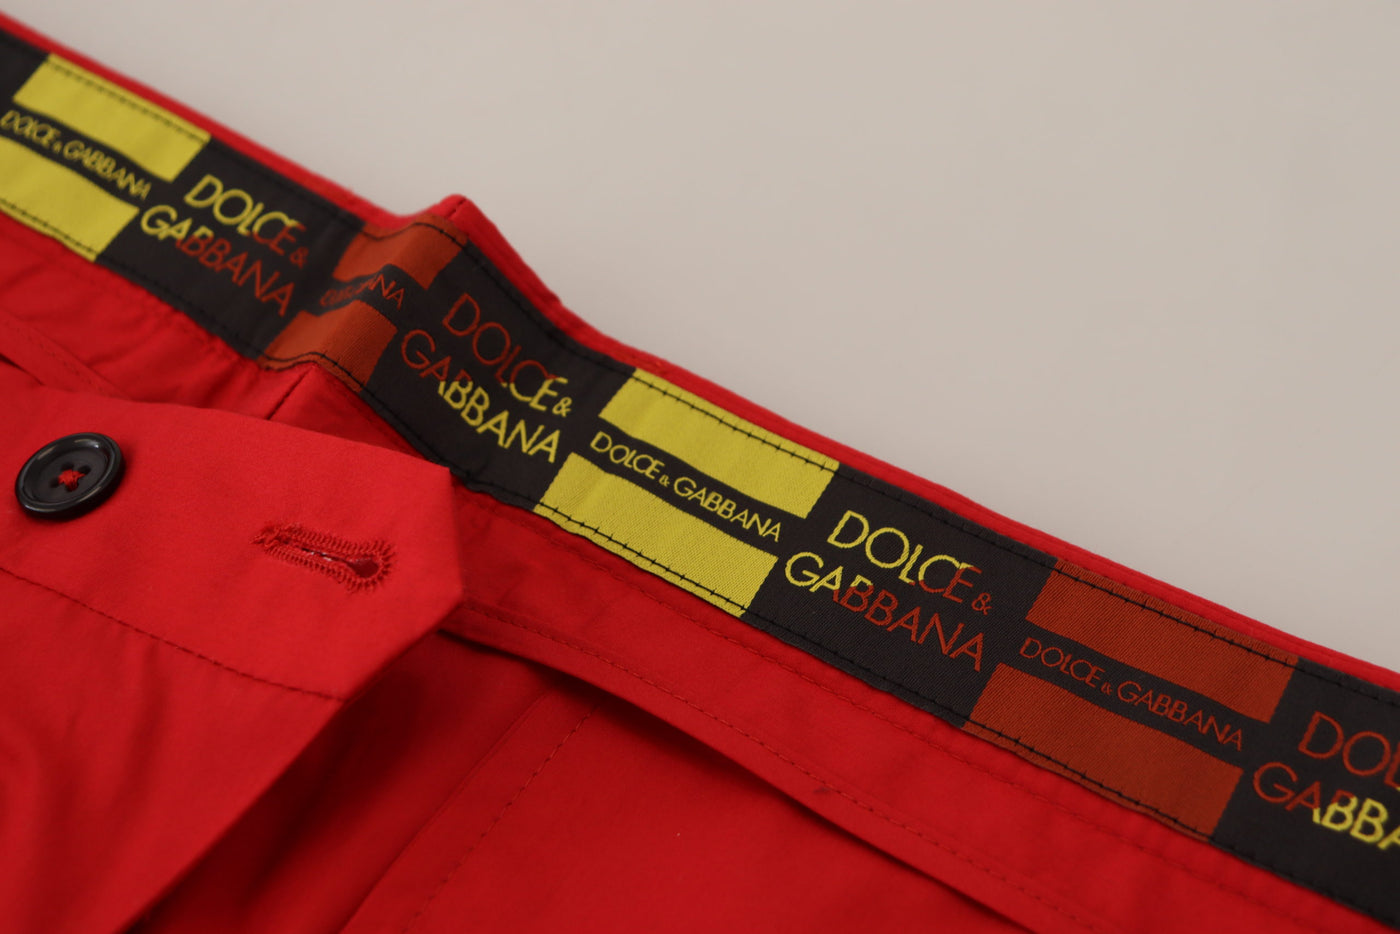 Dolce & Gabbana Red Cotton Slim Fit Trousers Chinos Pants